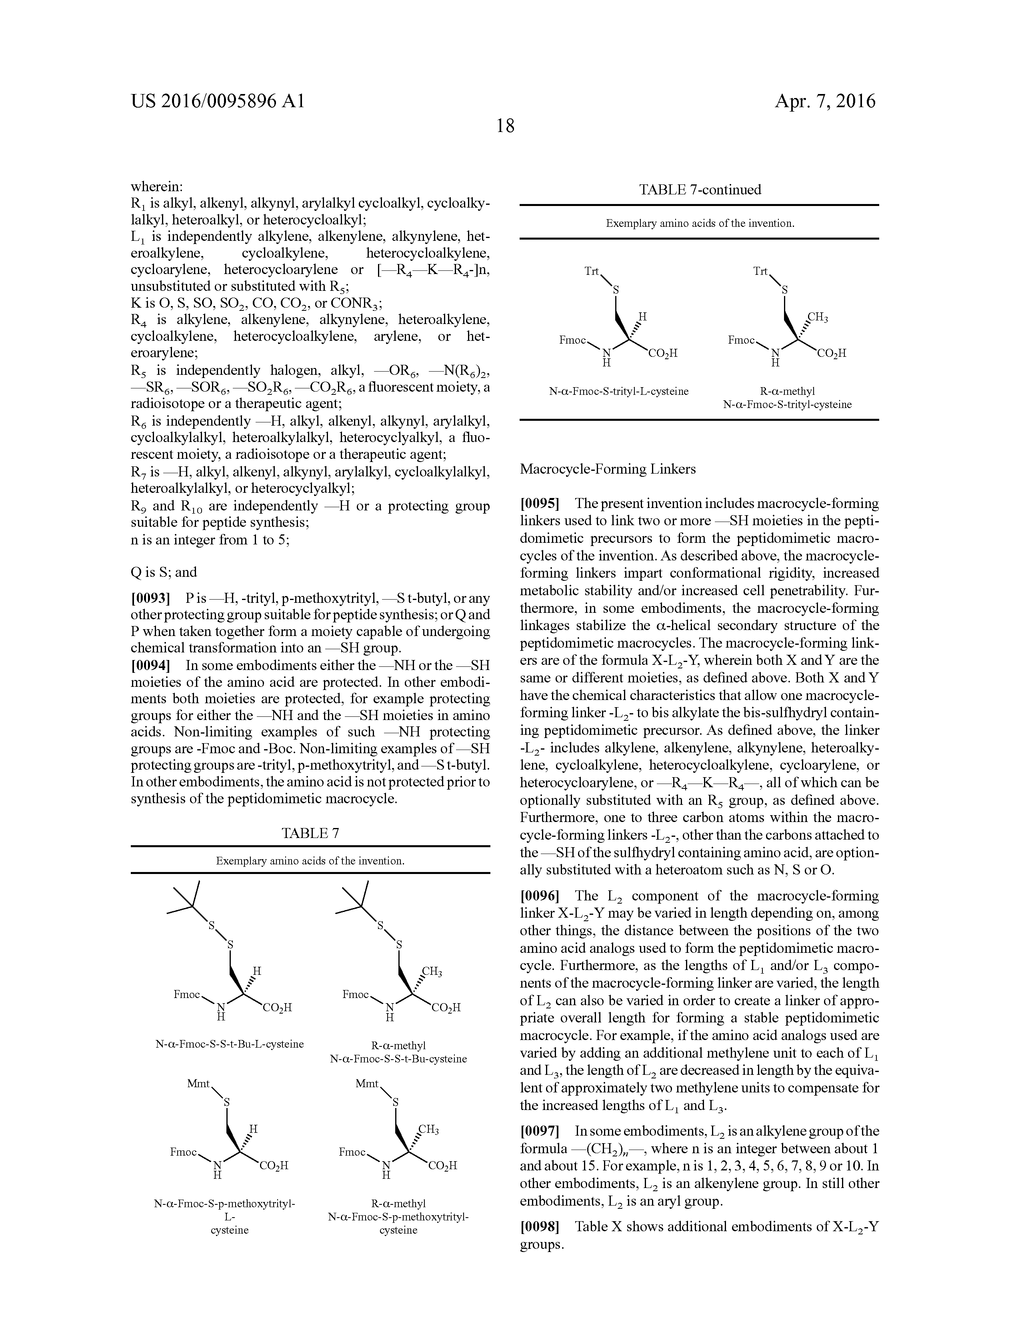 BIS-SULFHYDRYL MACROCYCLIZATION SYSTEMS - diagram, schematic, and image 20